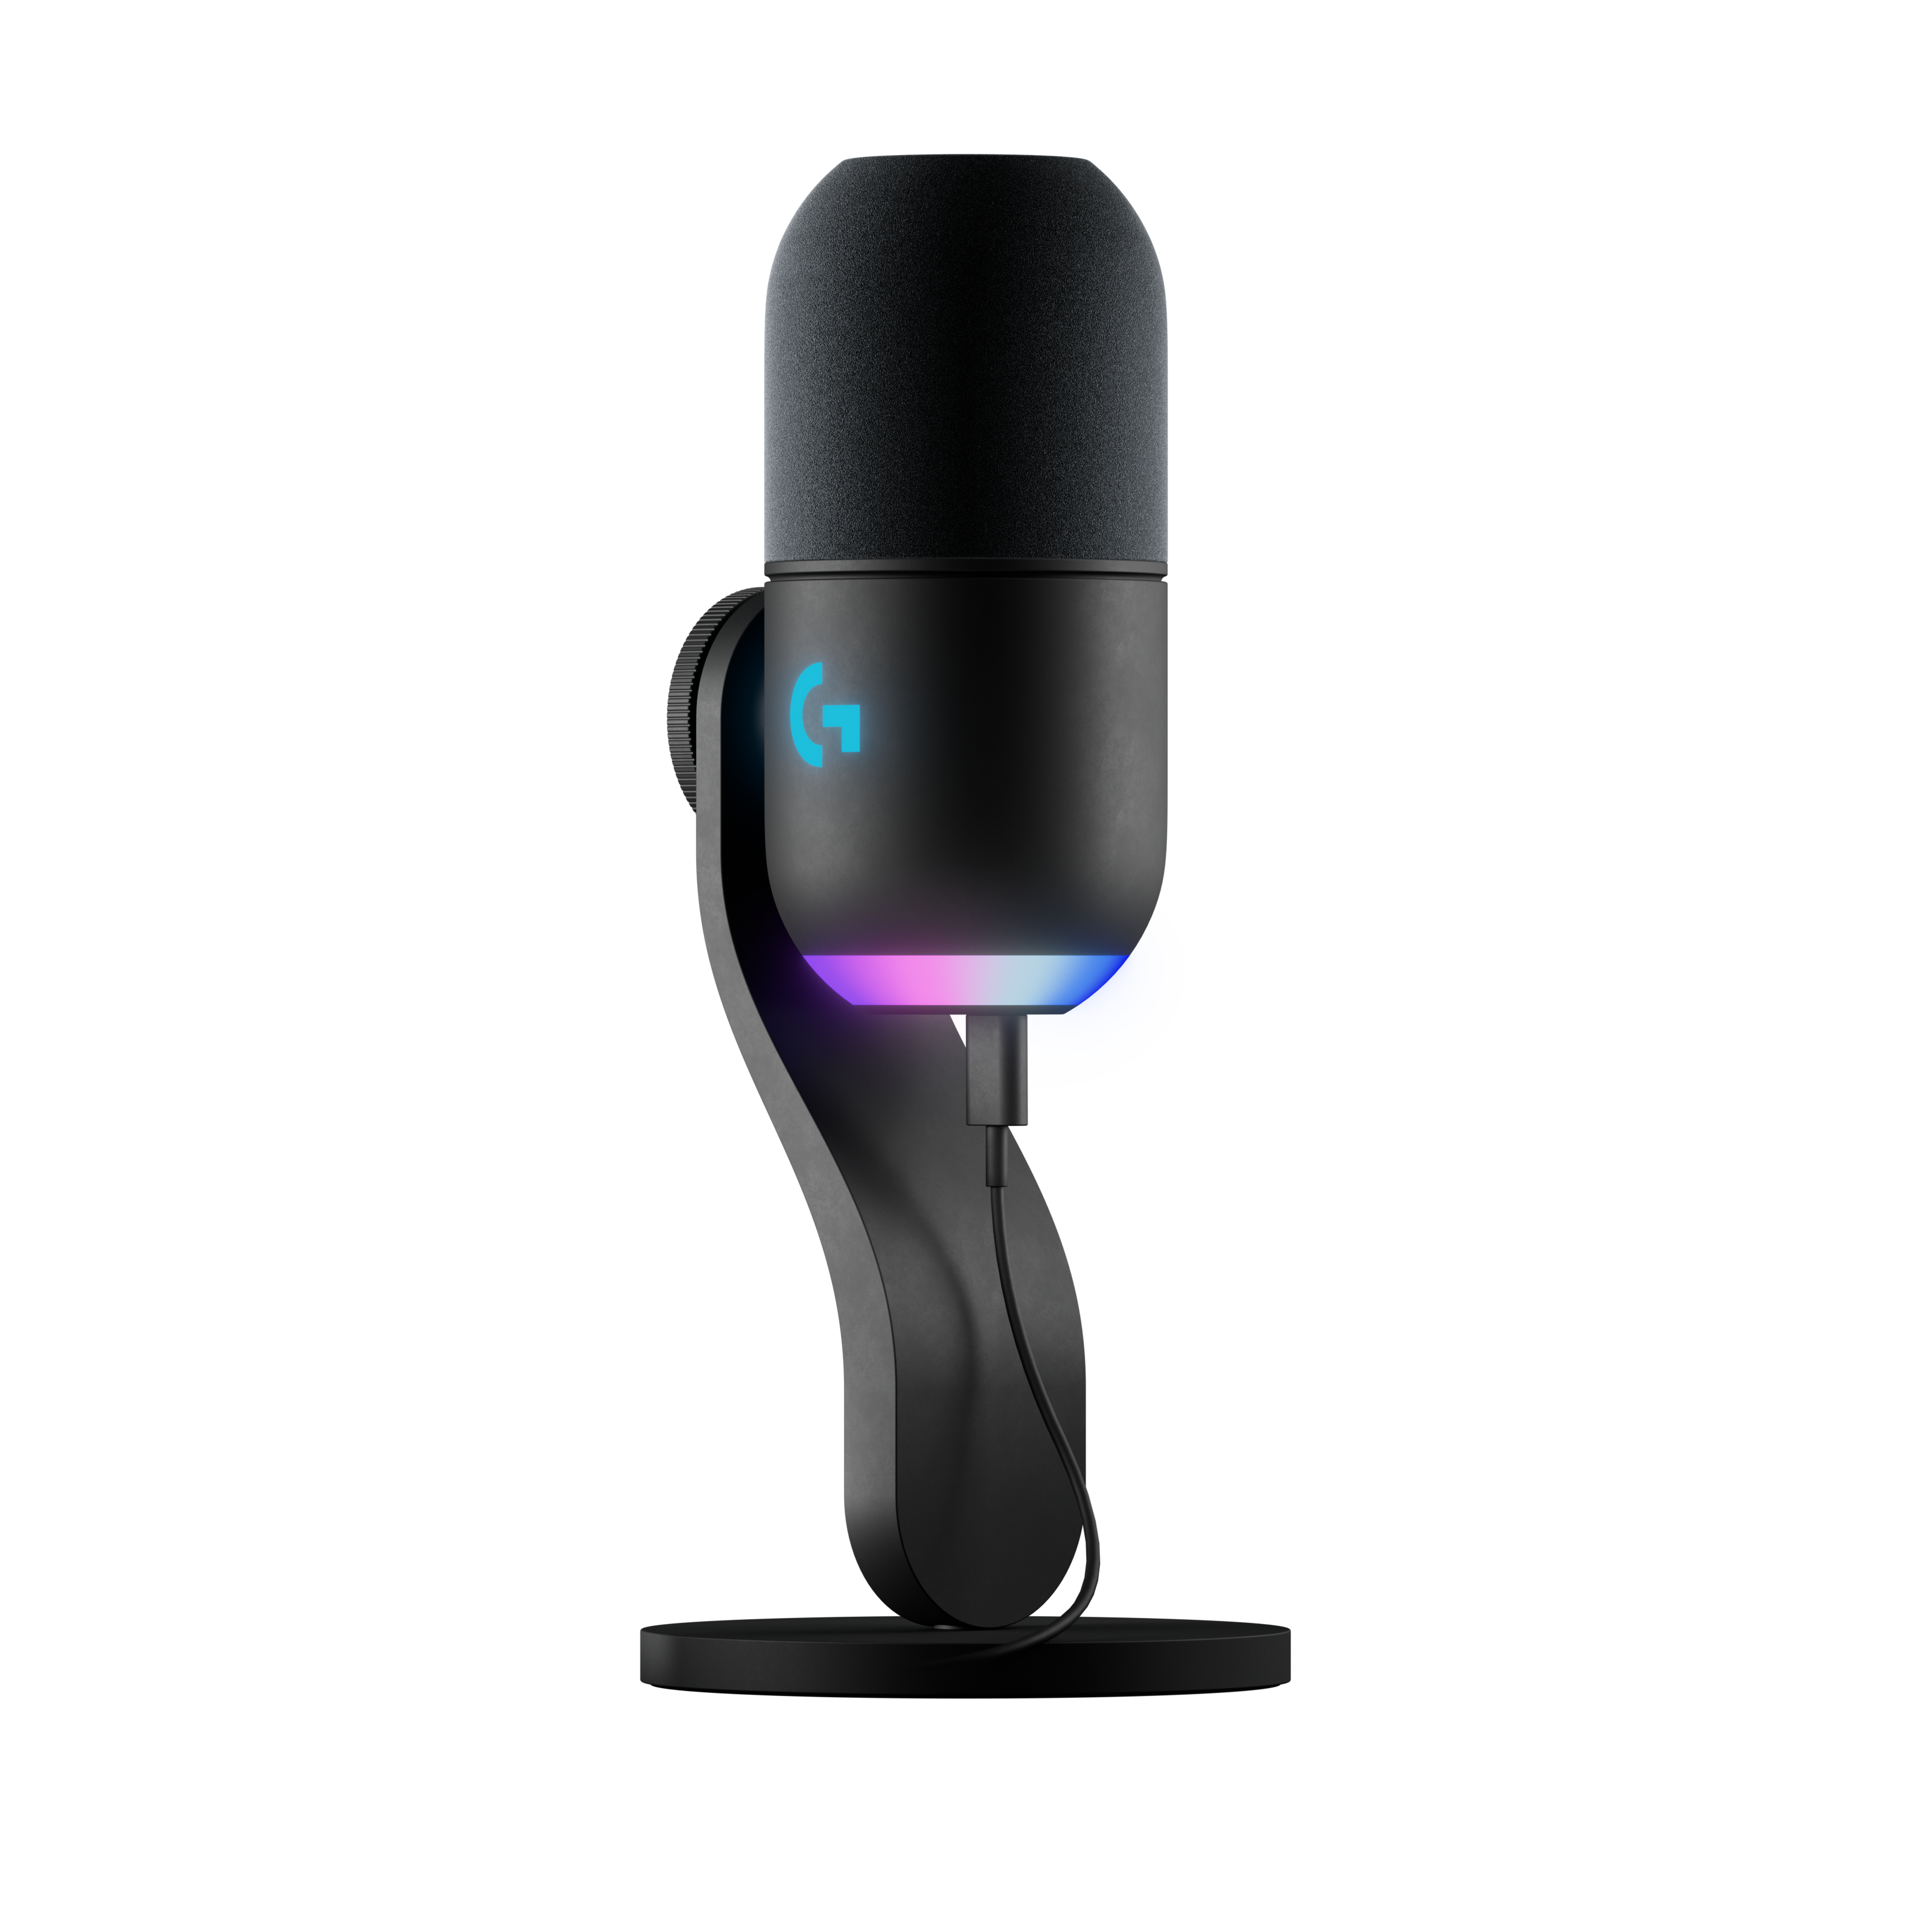 The Logitech G YETI GX microphone cancels out background noise